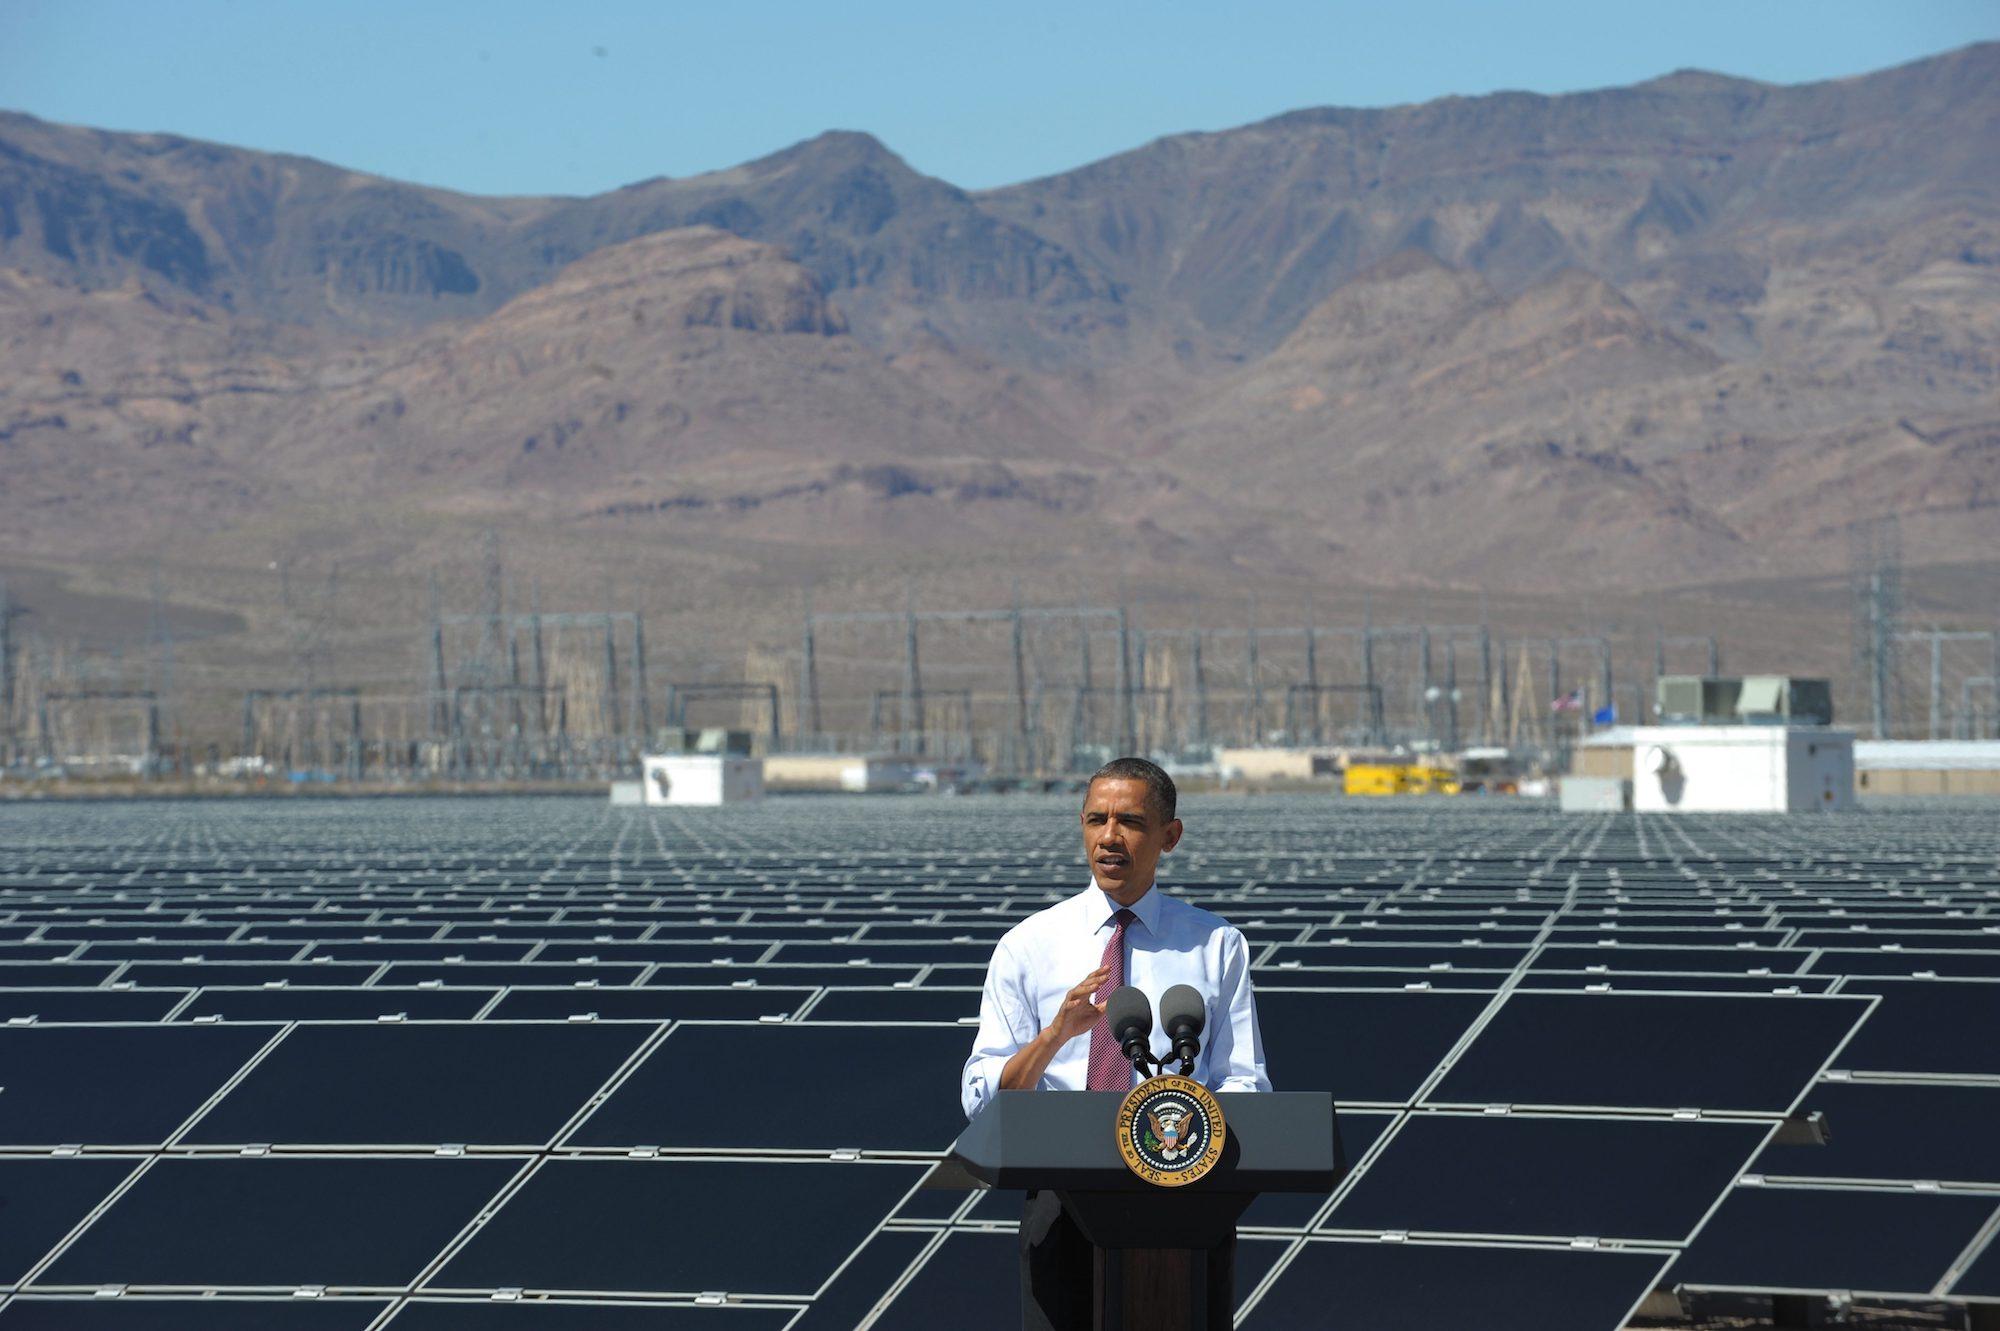 Barack Obama chose the Copper Mountain Solar Project in Nevada to talk about his energy policies, but Donald Trump has different priorities